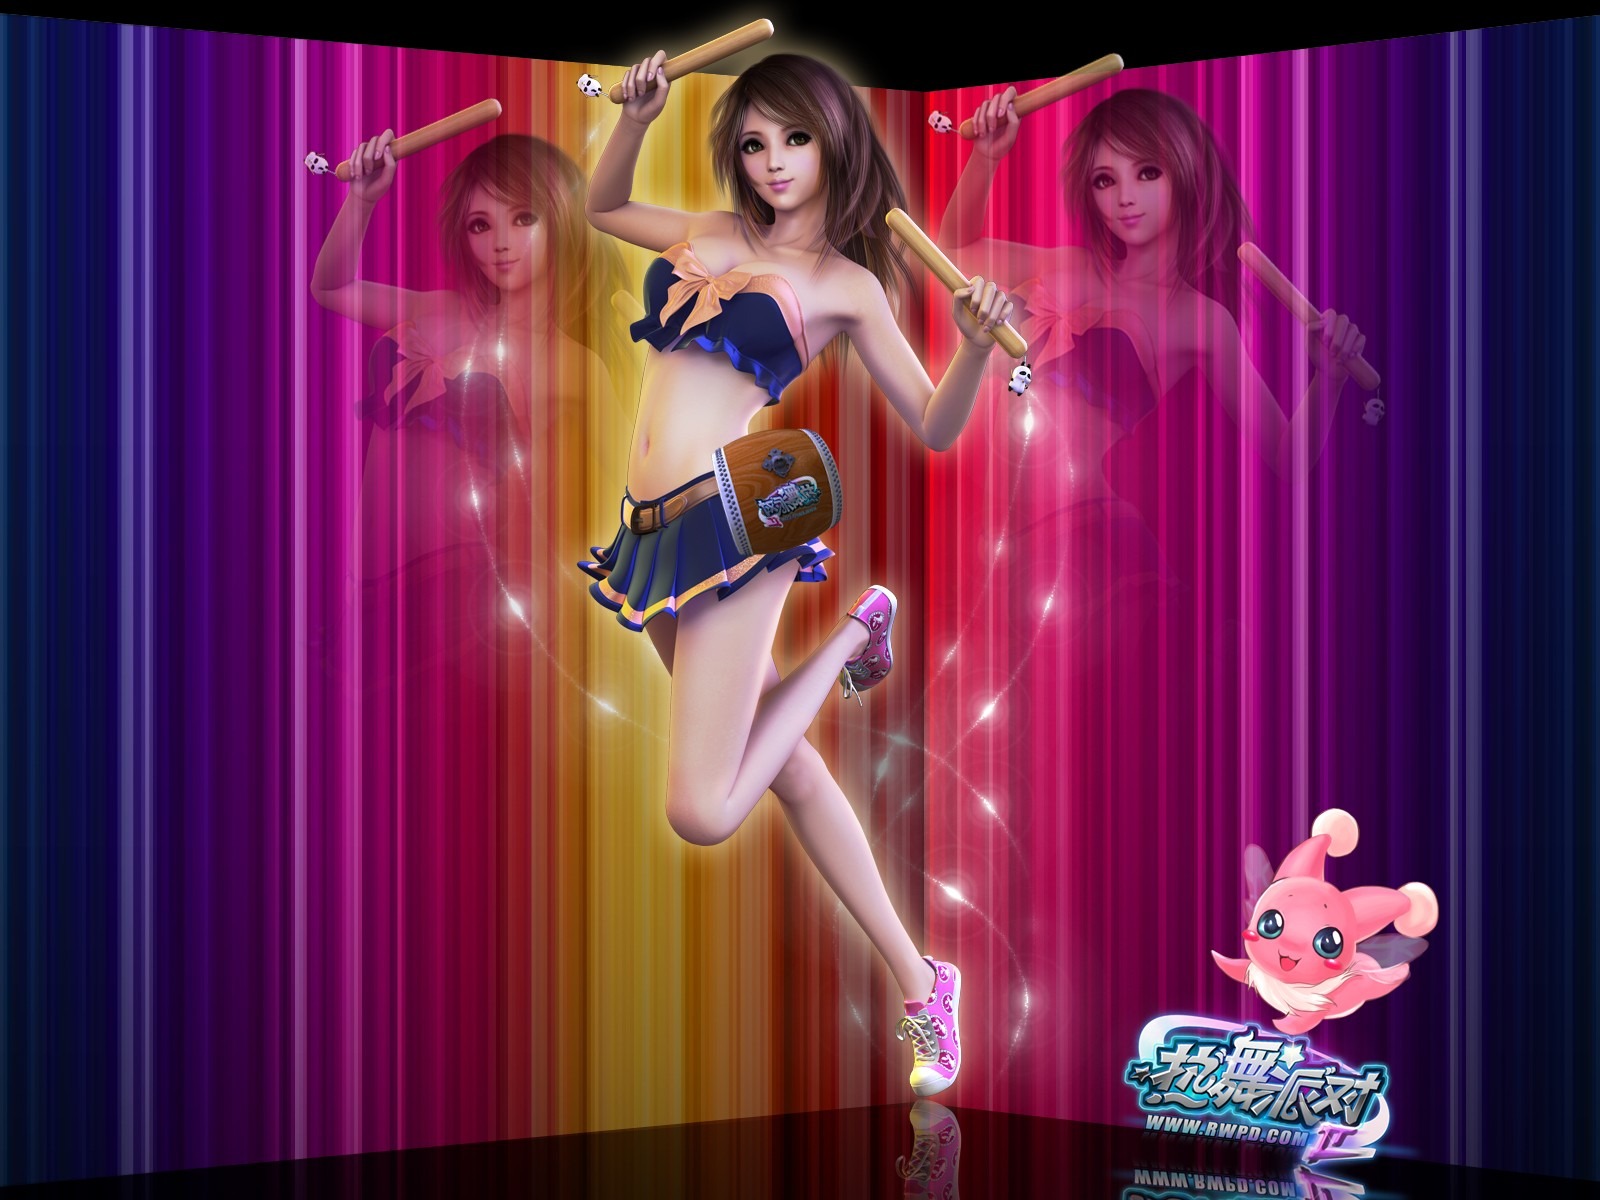 Online game Hot Dance Party II official wallpapers #18 - 1600x1200